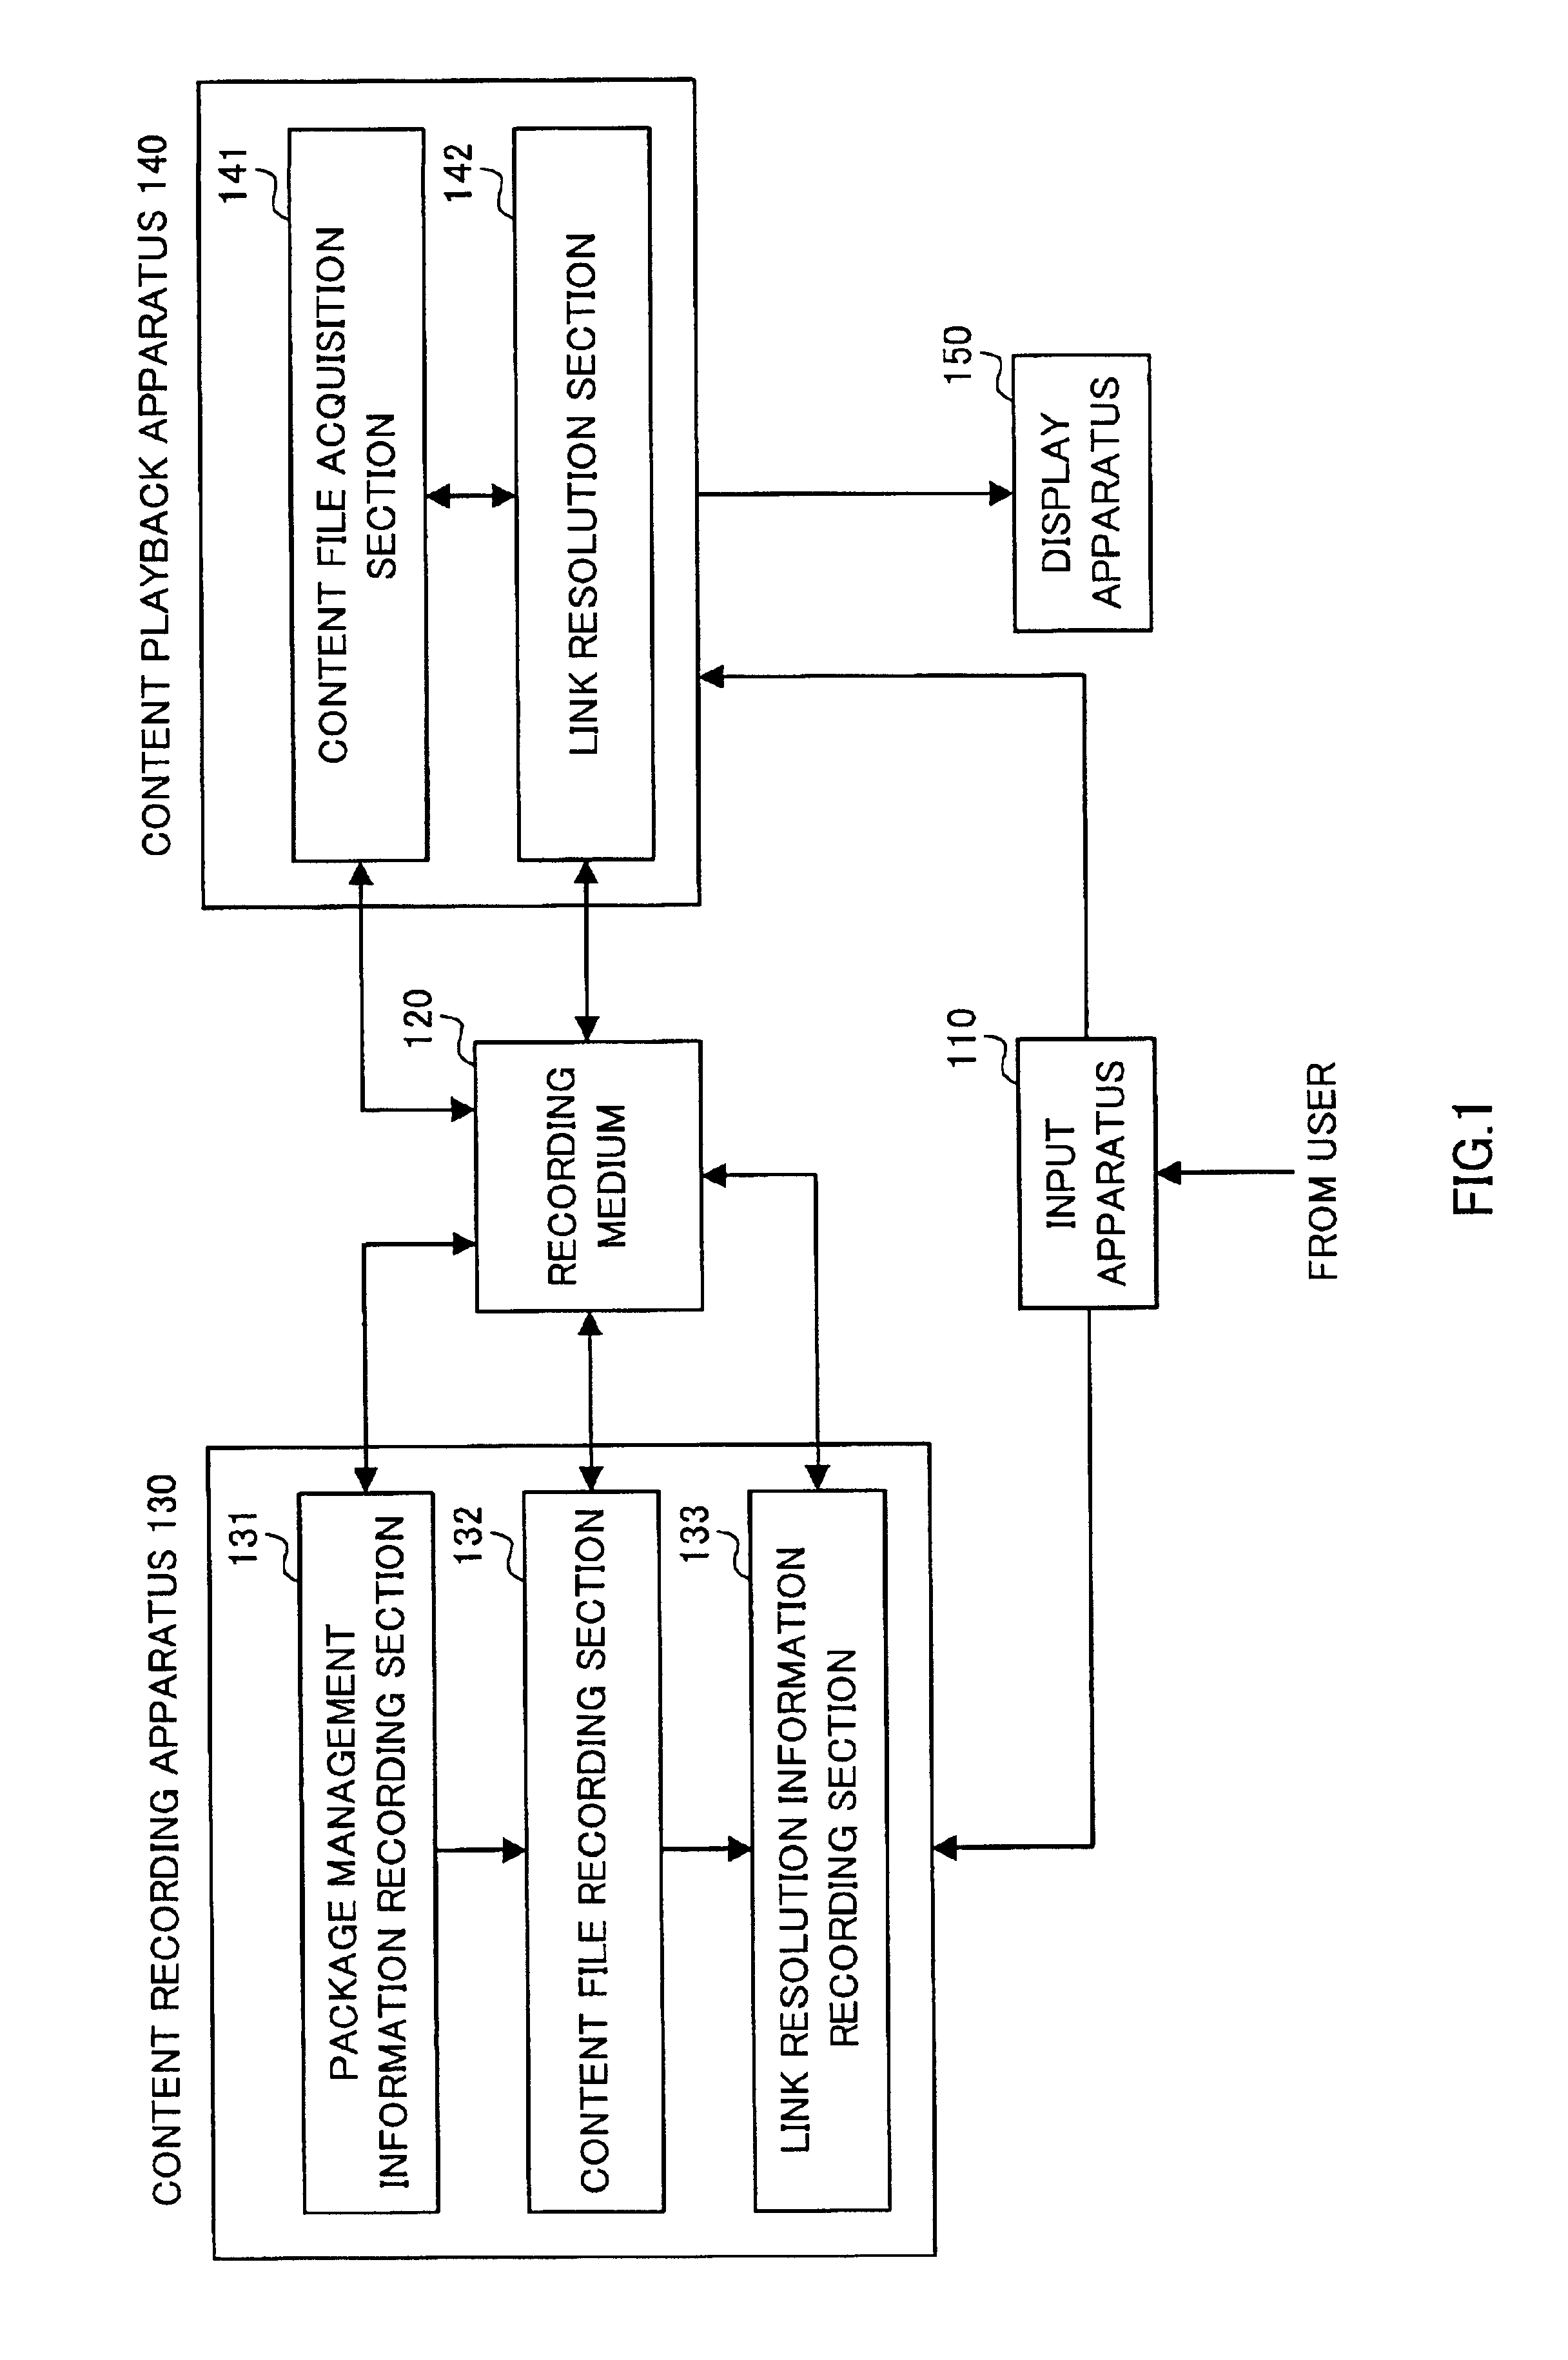 File management method and content recording/playback apparatus